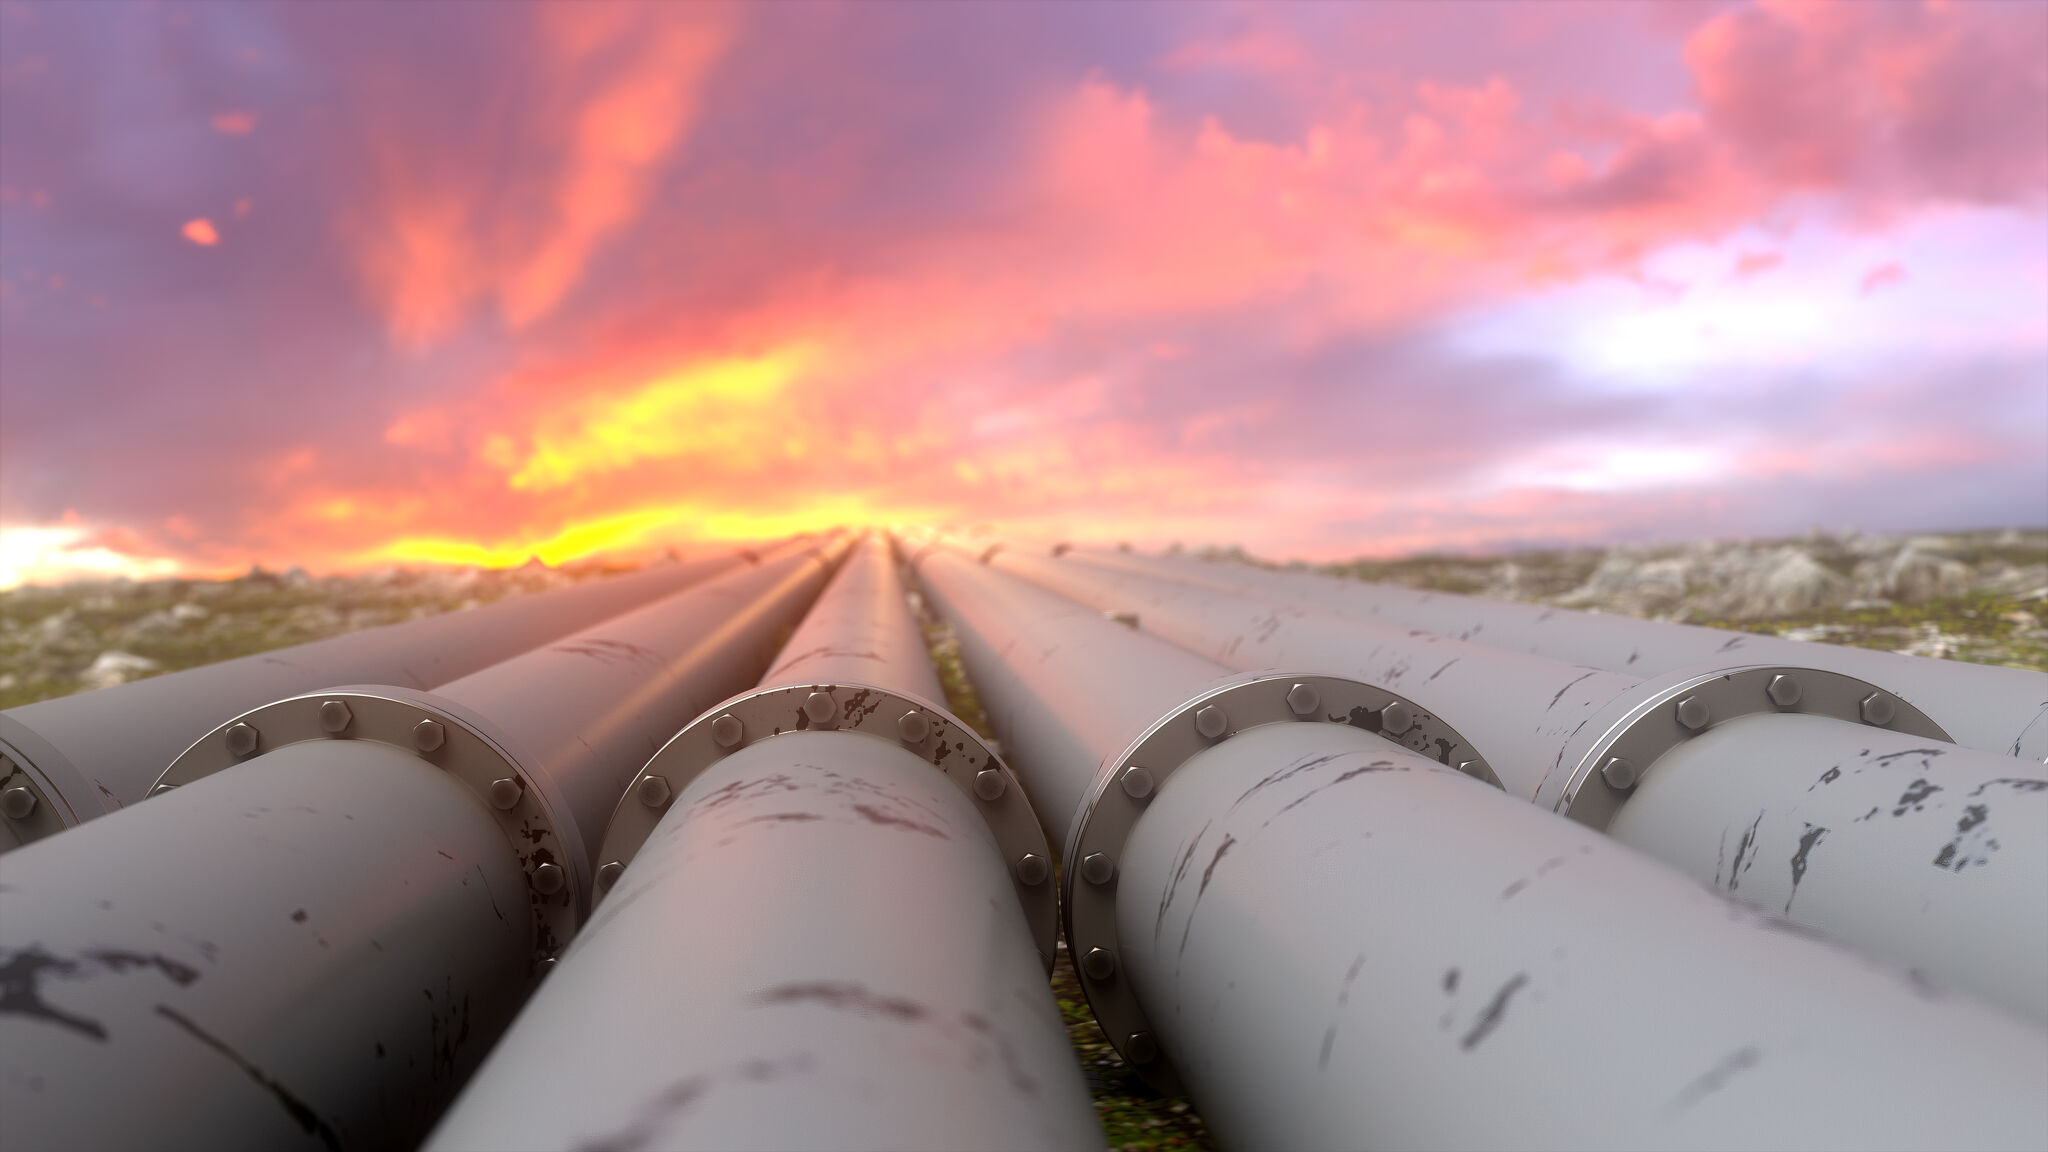  Environmental group petitioning politicians, Army Corps of Engineers for review of proposed CO2 pipeline 